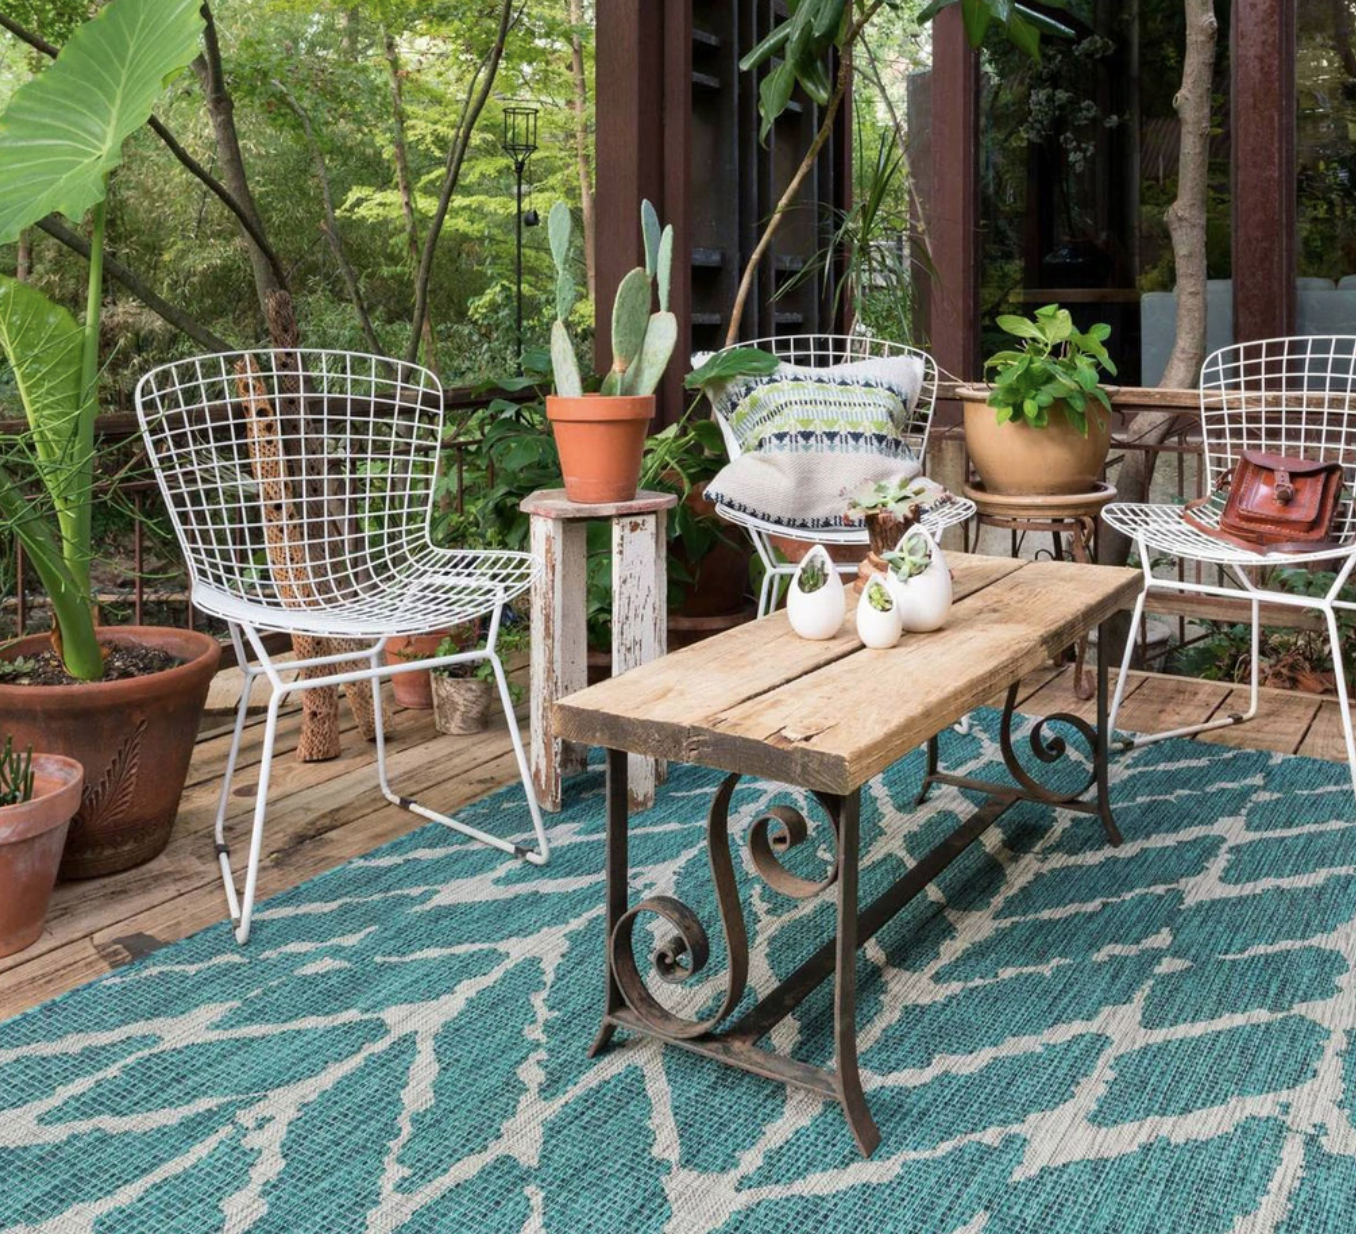 teal and white patterned outdoor rug below a wooden table and white iron chairs